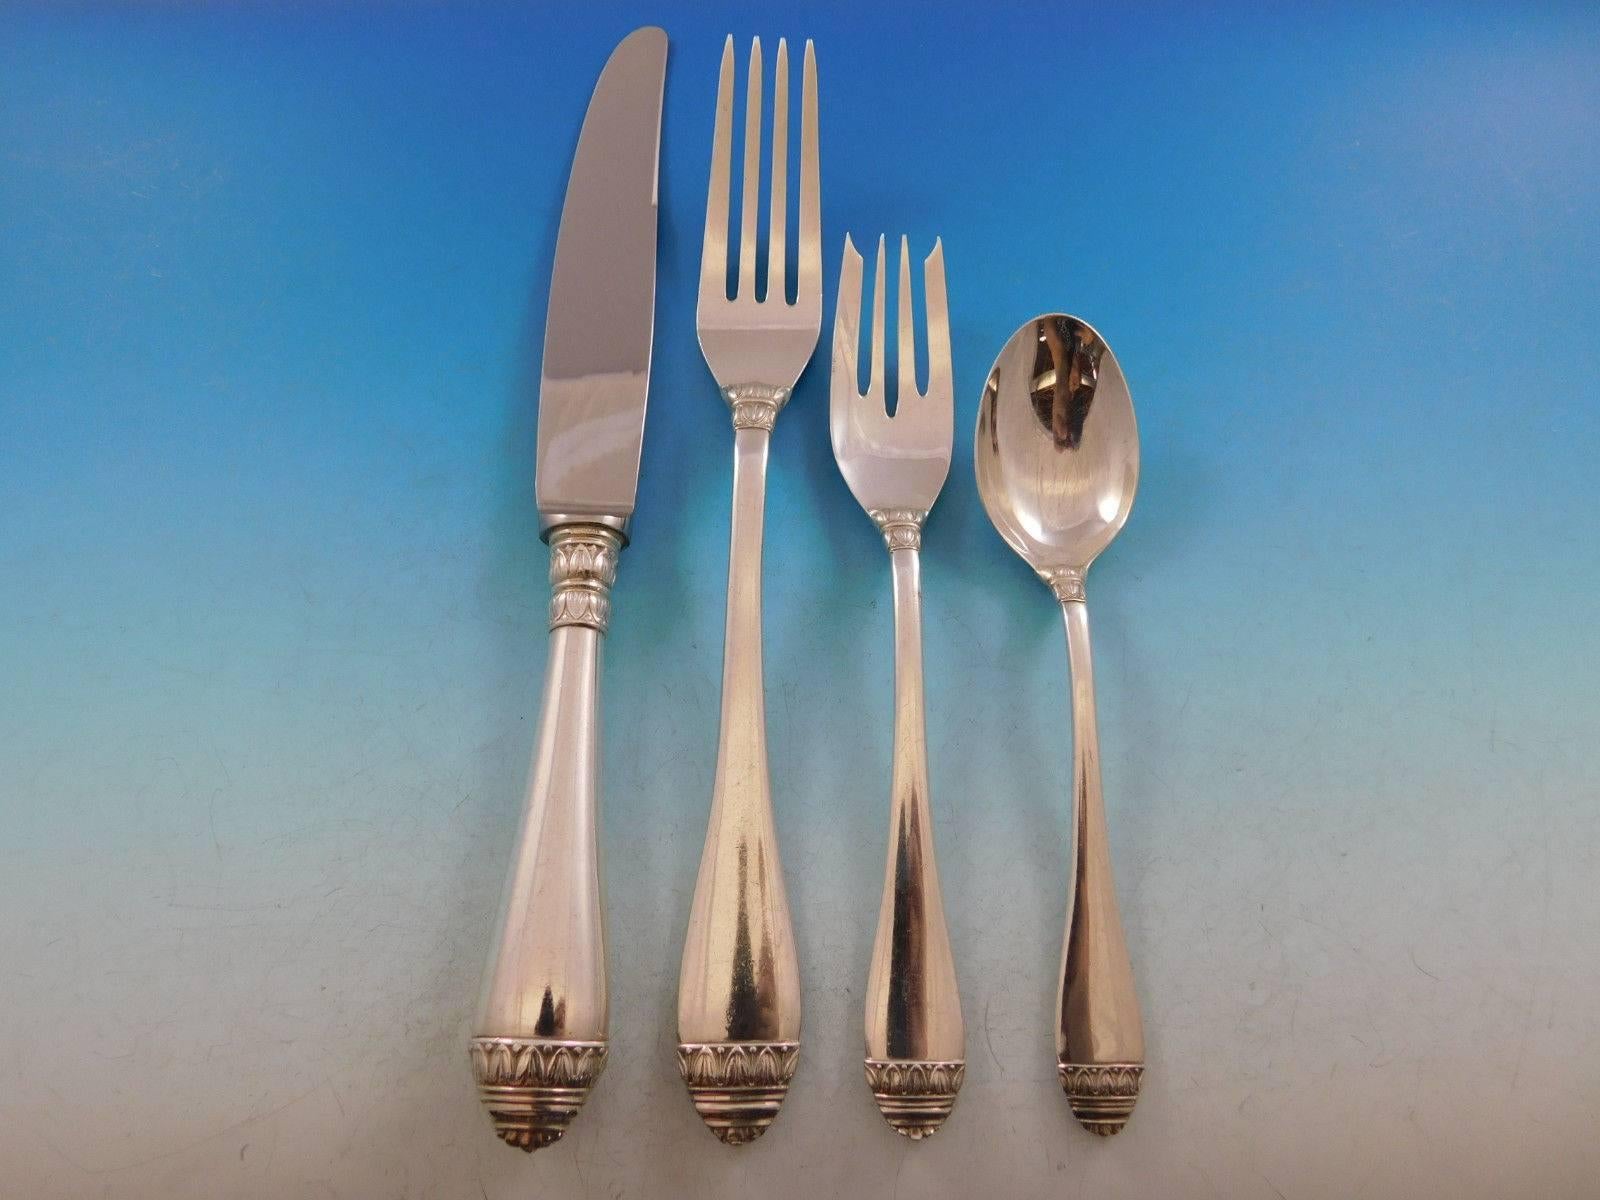 Stunning French Empire by Buccellati sterling silver Flatware set - 26 Pieces. Great starter set! This set includes:

4 Dinner Knives, 10